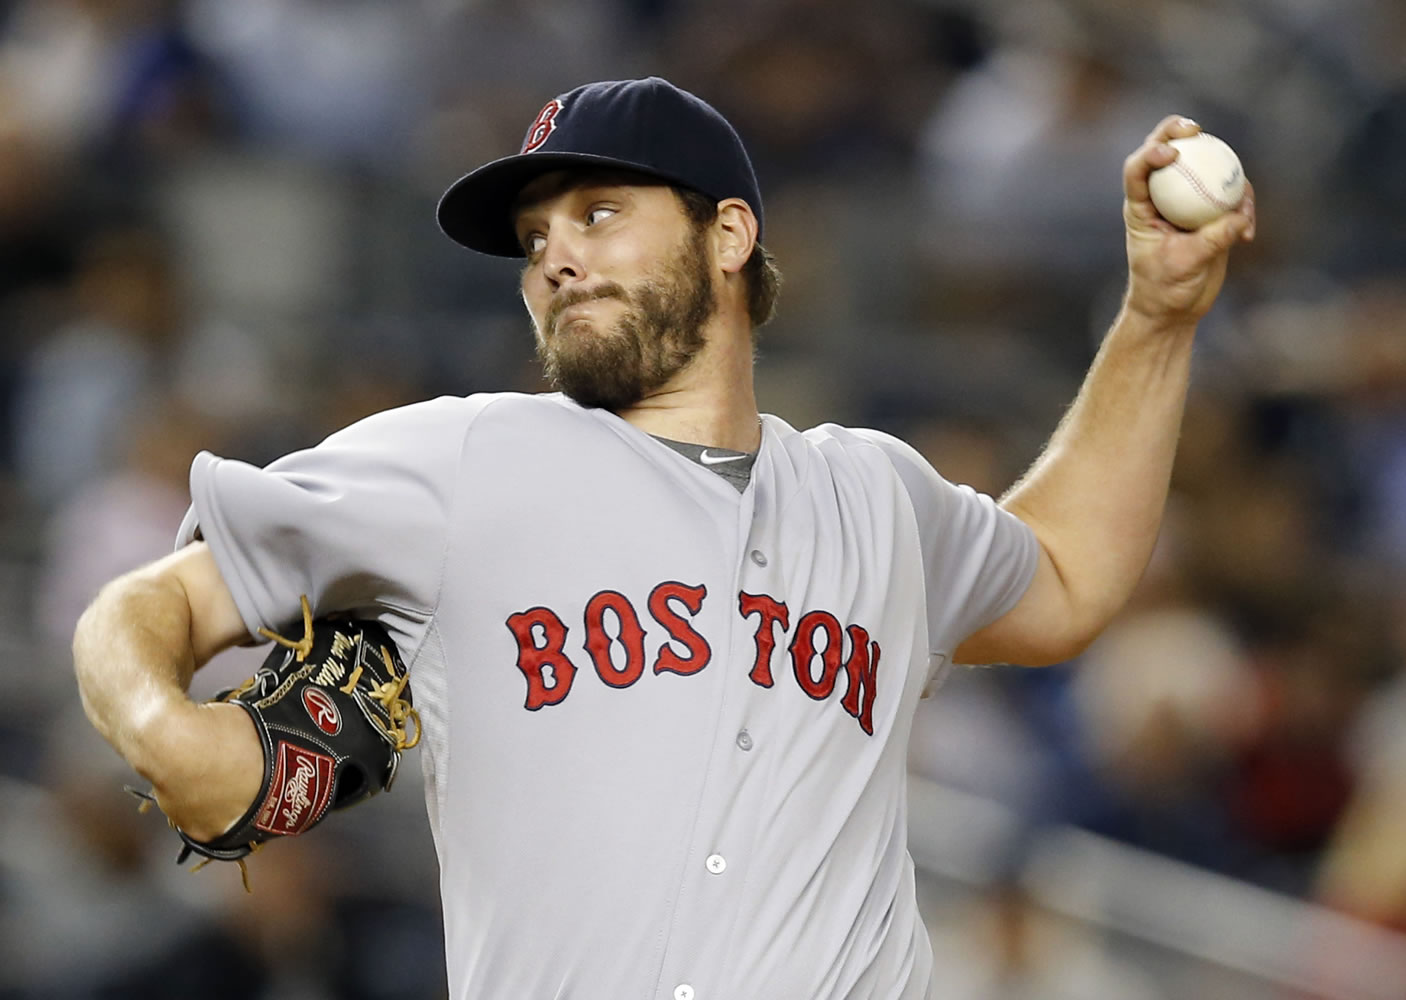 The Seattle Mariners have obtained left-hander Wade Miley (pictured here) and reliever Jonathan Aro from the Boston Red Sox for reliever Carson Smith and pitcher Roenis Elias, Monday, Dec. 7, 2015.